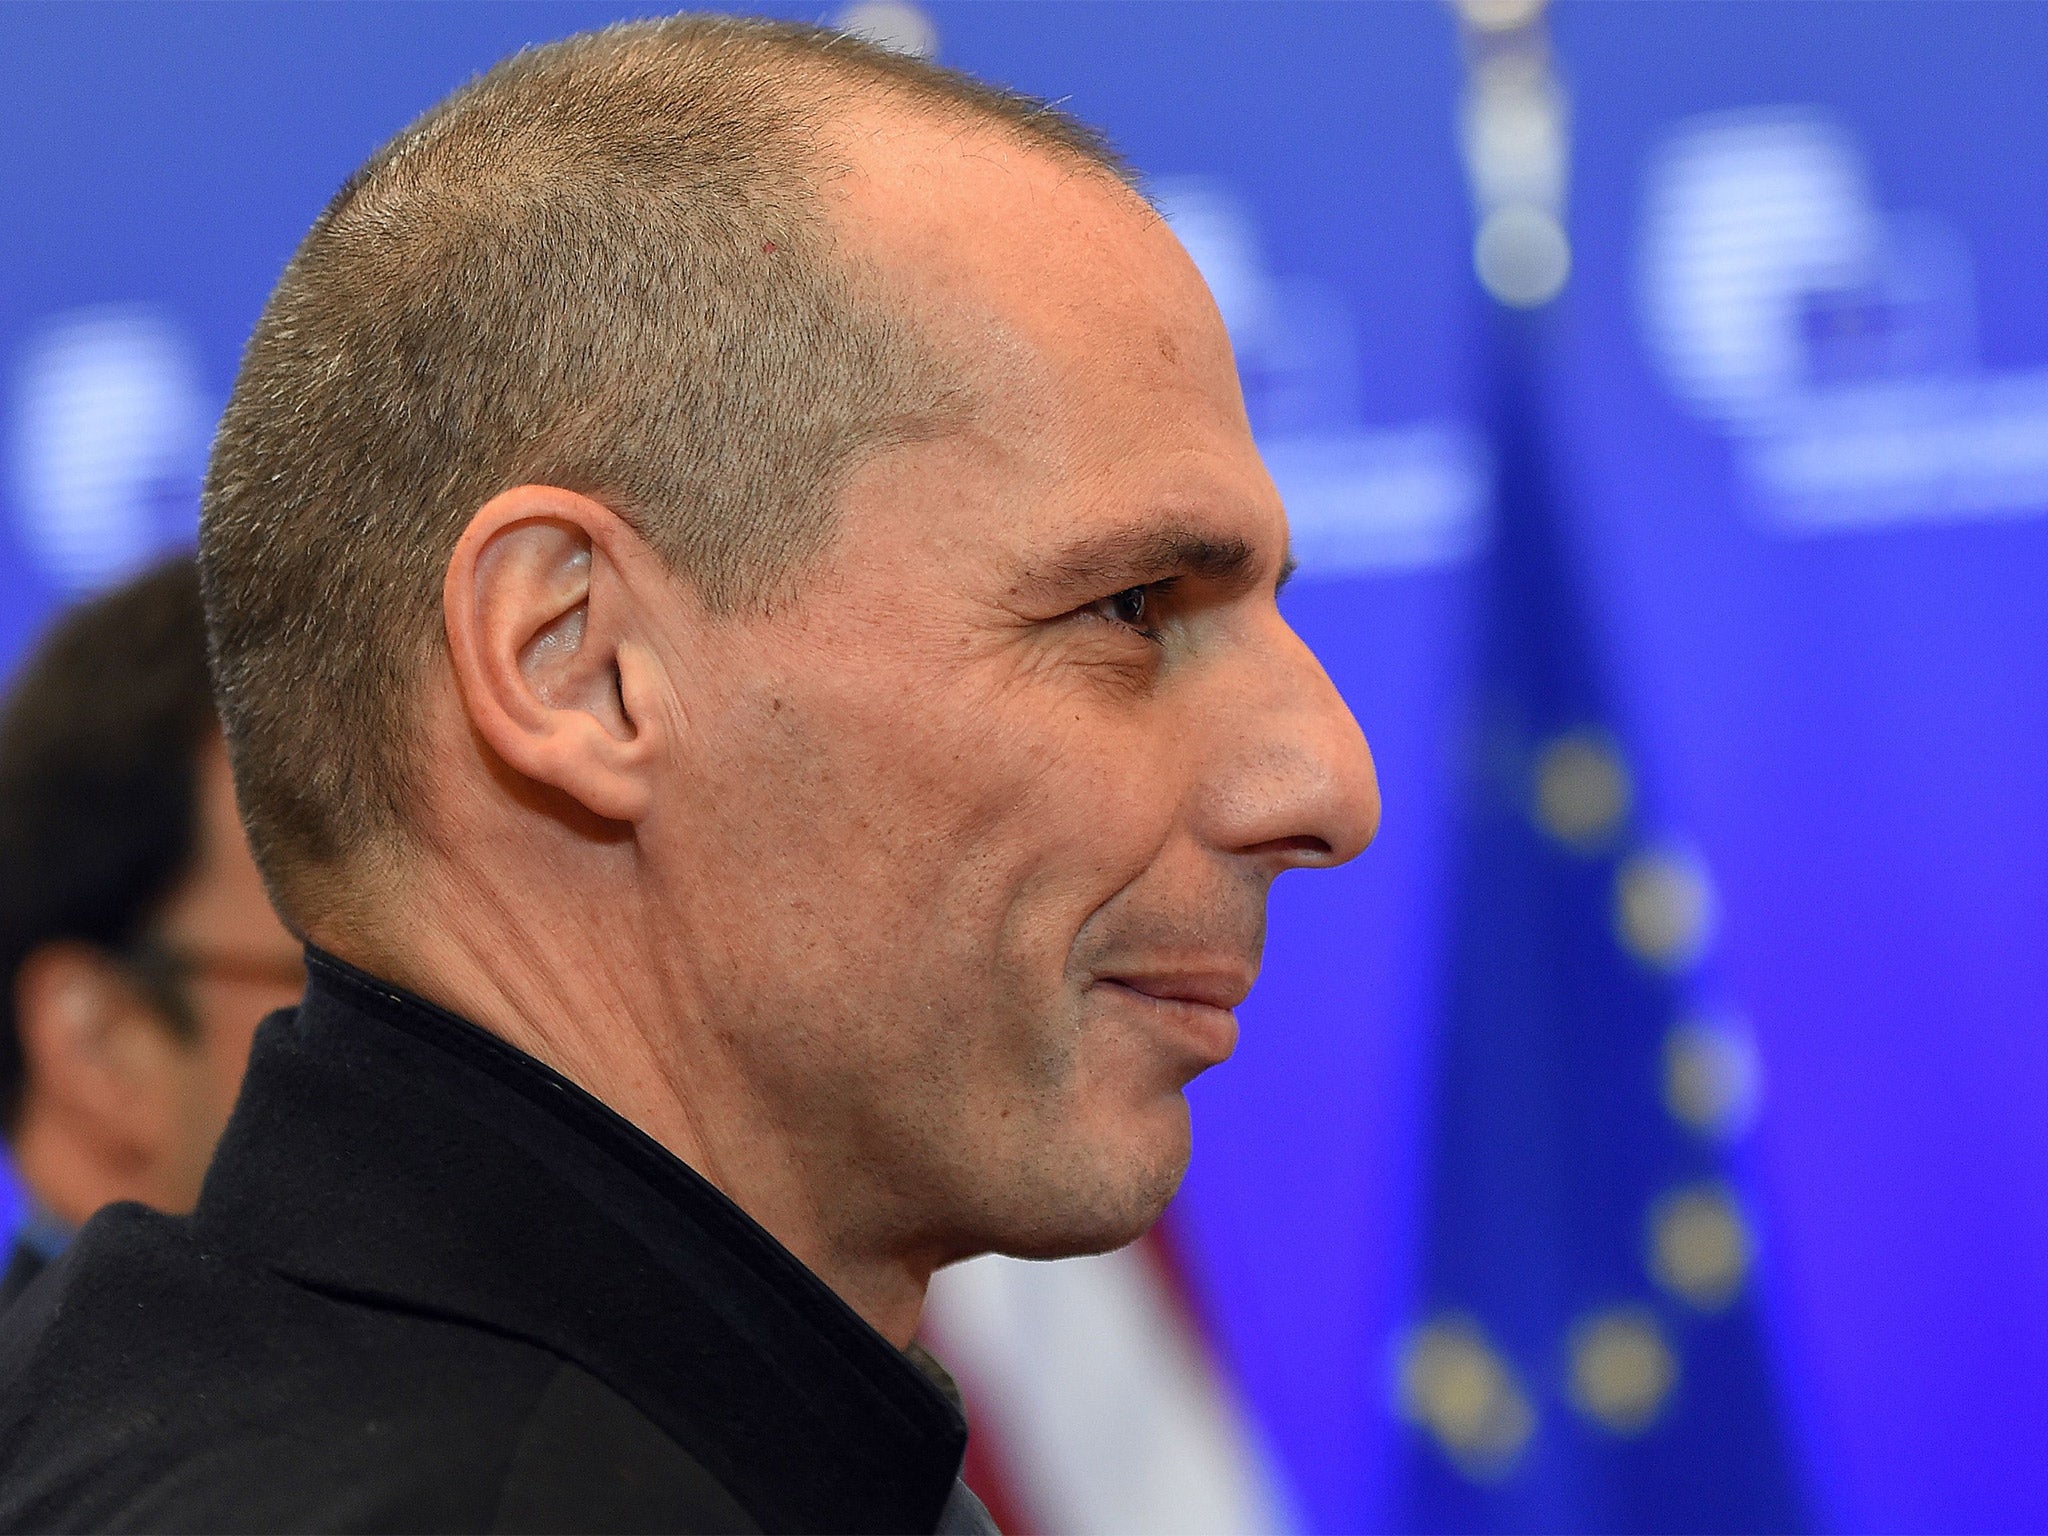 Officials in Athens have dened reports in Bild that finance minister Yanis Varoufakis was planning to resign